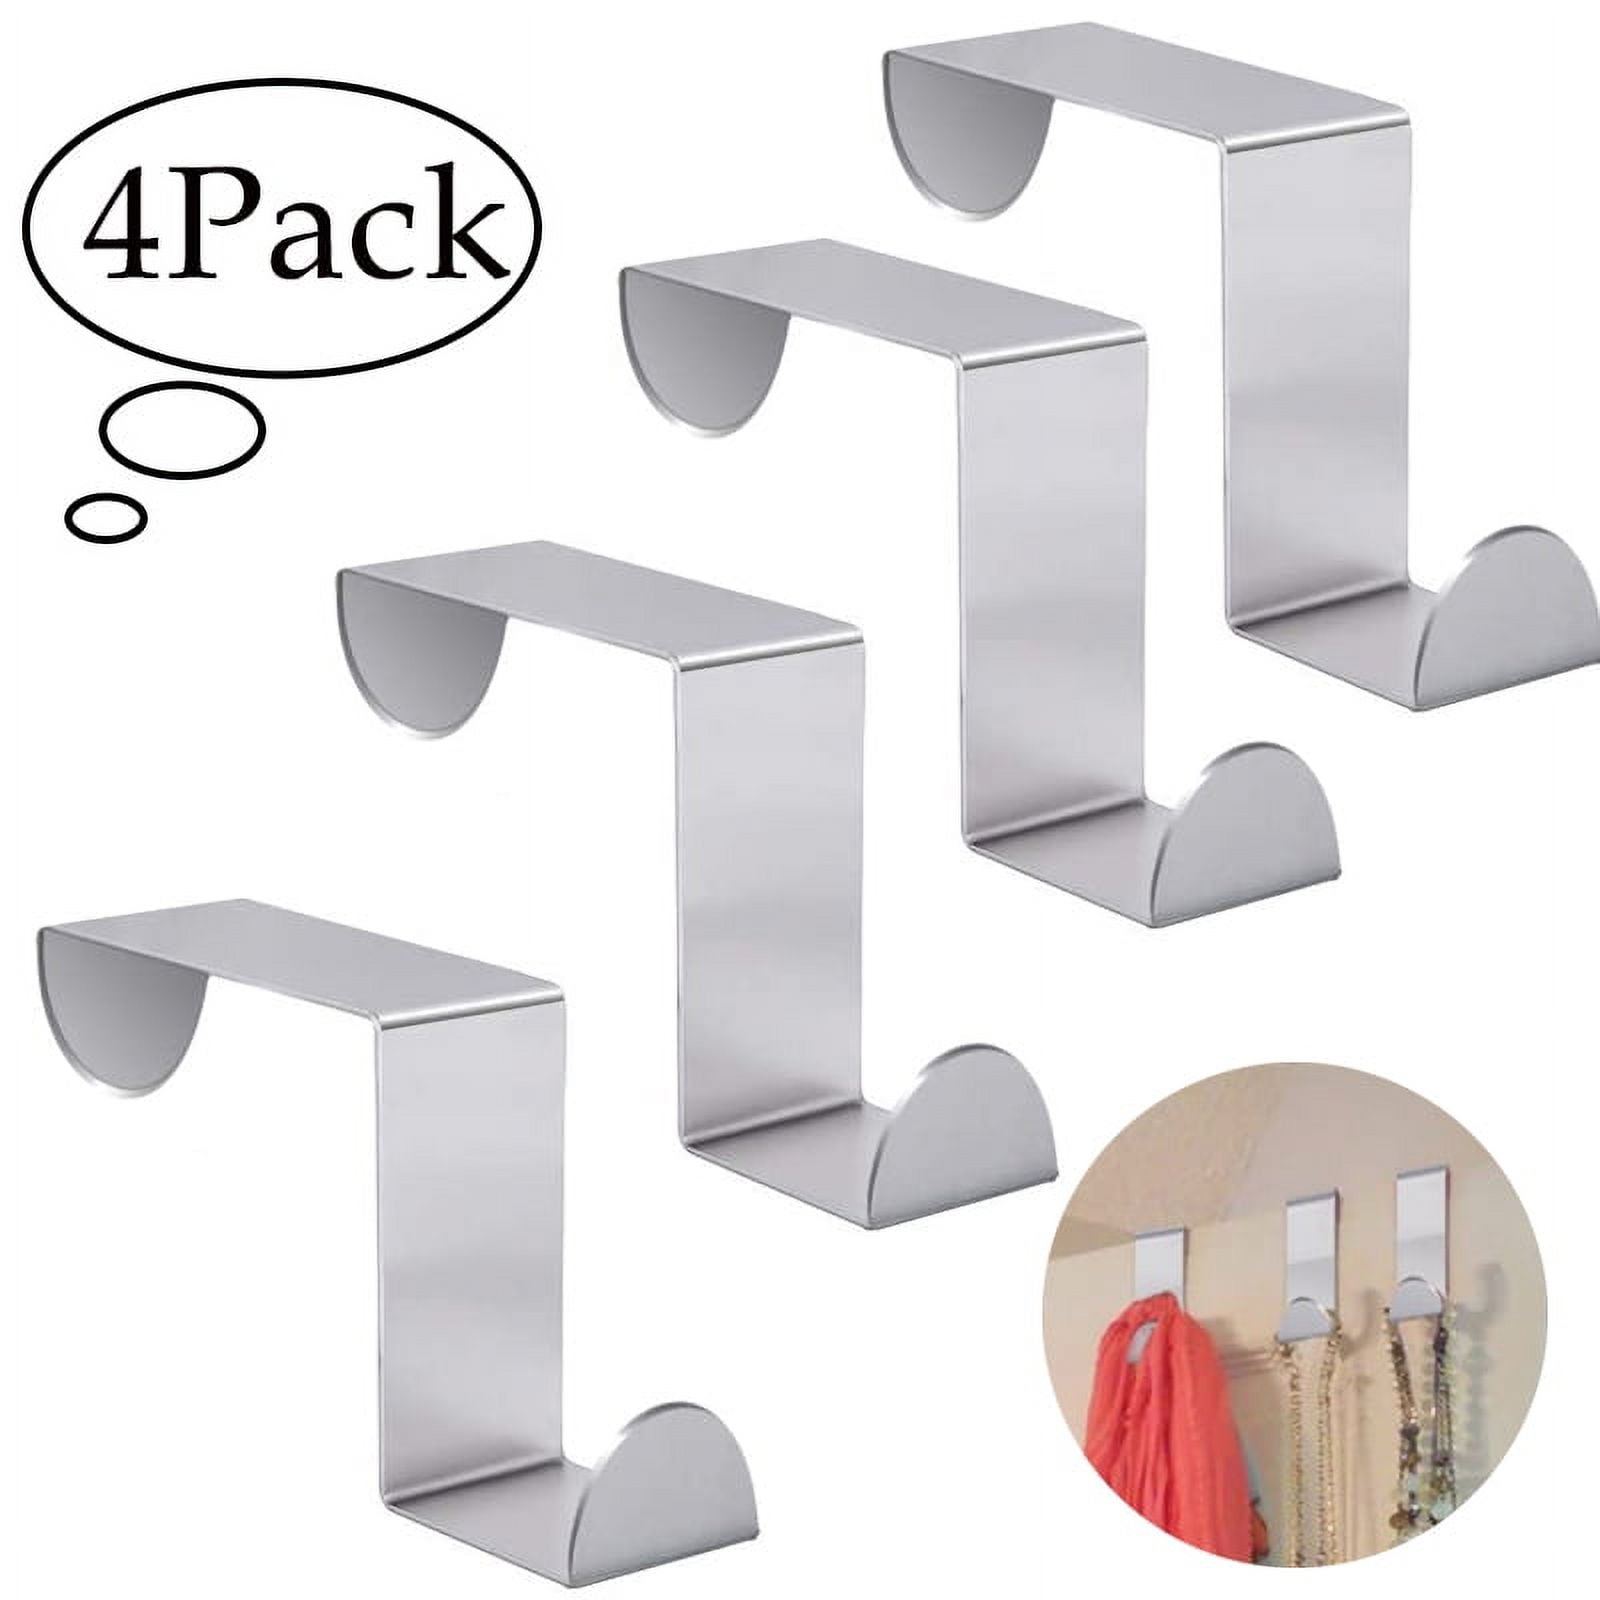 LNKOO Over Door Hook - Double Side Wide or Narrow Gate, Hanged in The Back  of Kitchen,Cabinet,Bathroom,Recycled Cubicle,Closet,Pantry,Laundry